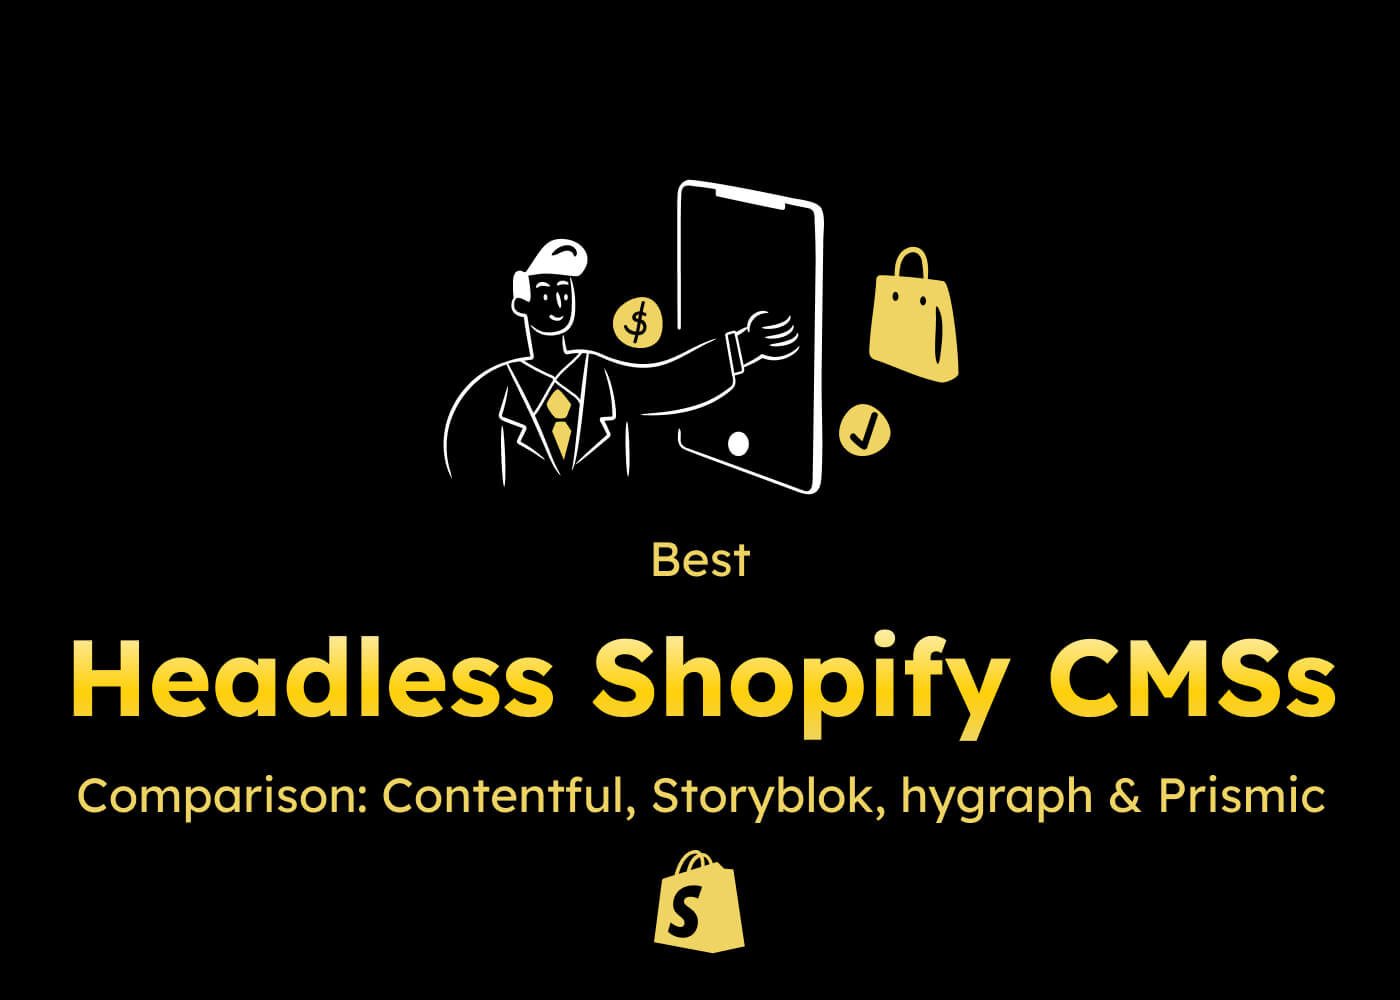 Best Headless CMSs to extend your Headless Shopify Plus eCommerce store